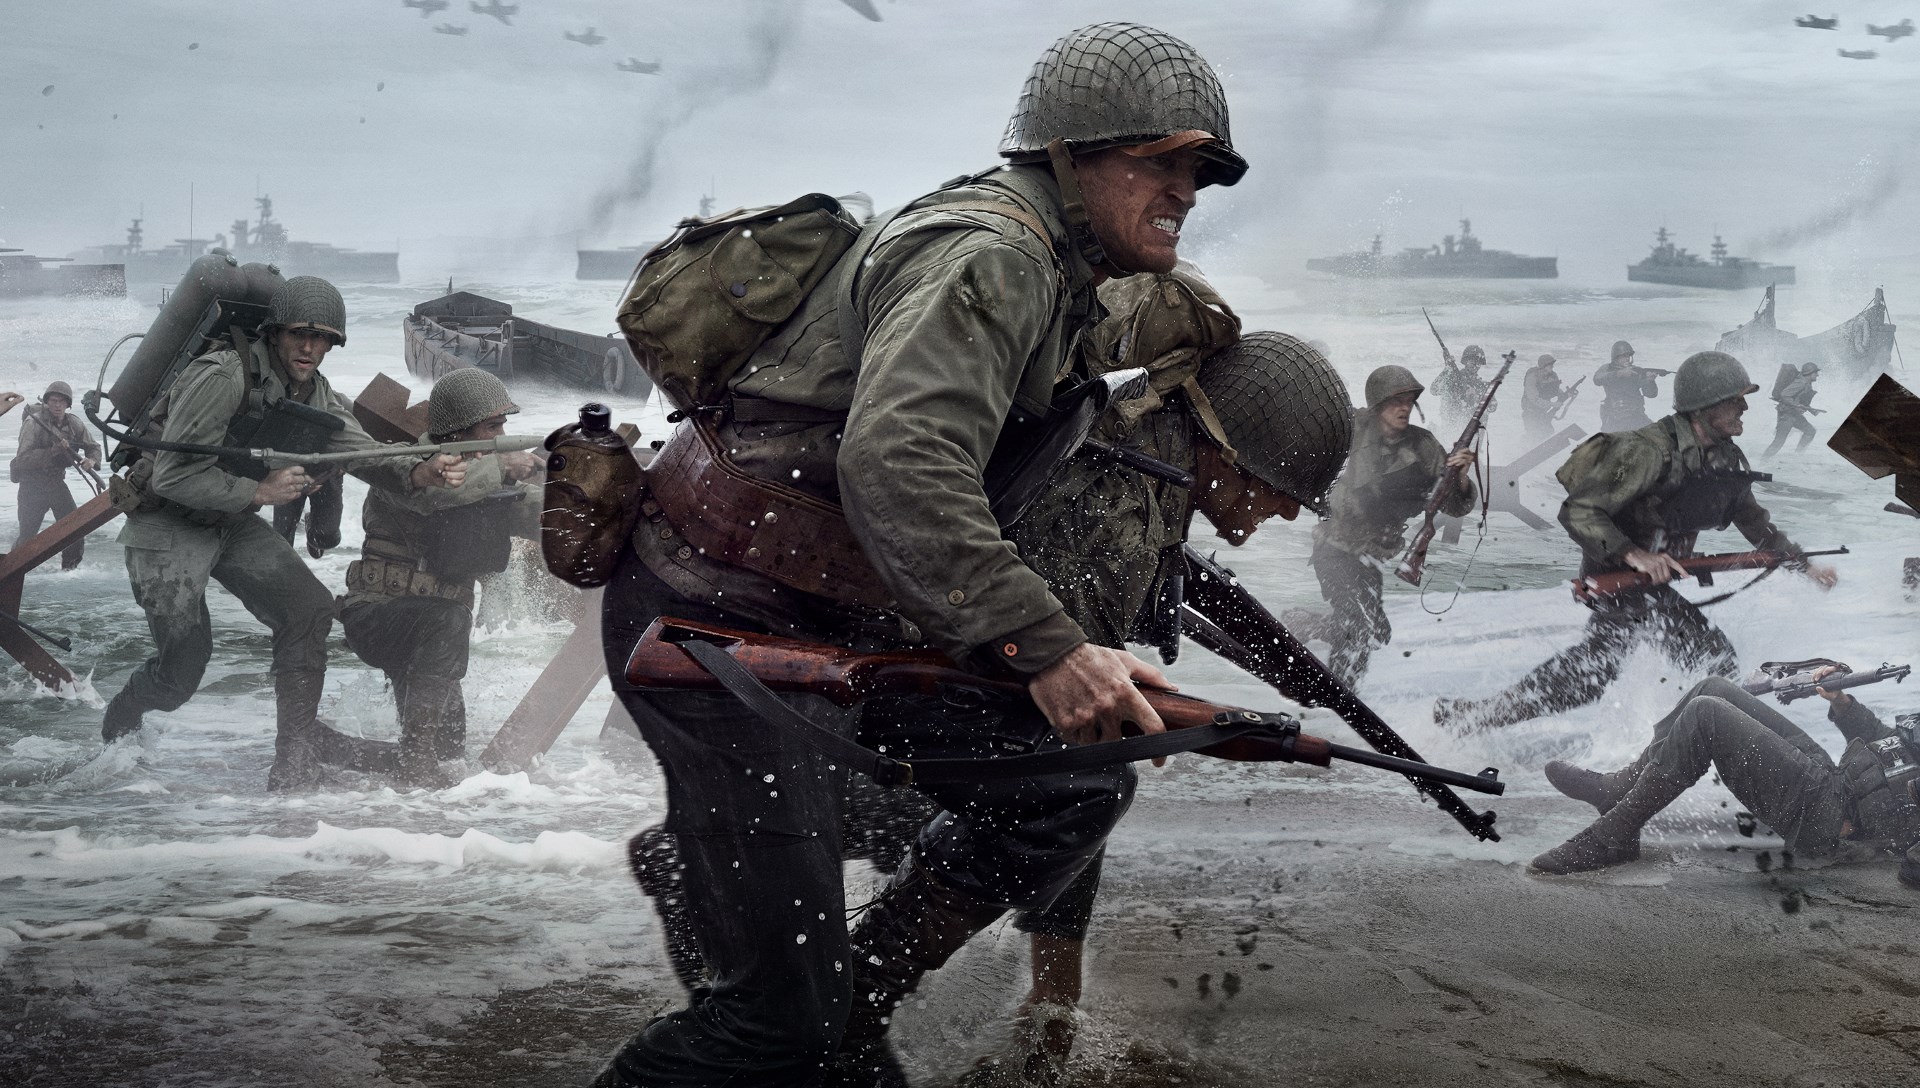 The CALL OF DUTY:WWII PC Open Beta is Now Live — GameTyrant